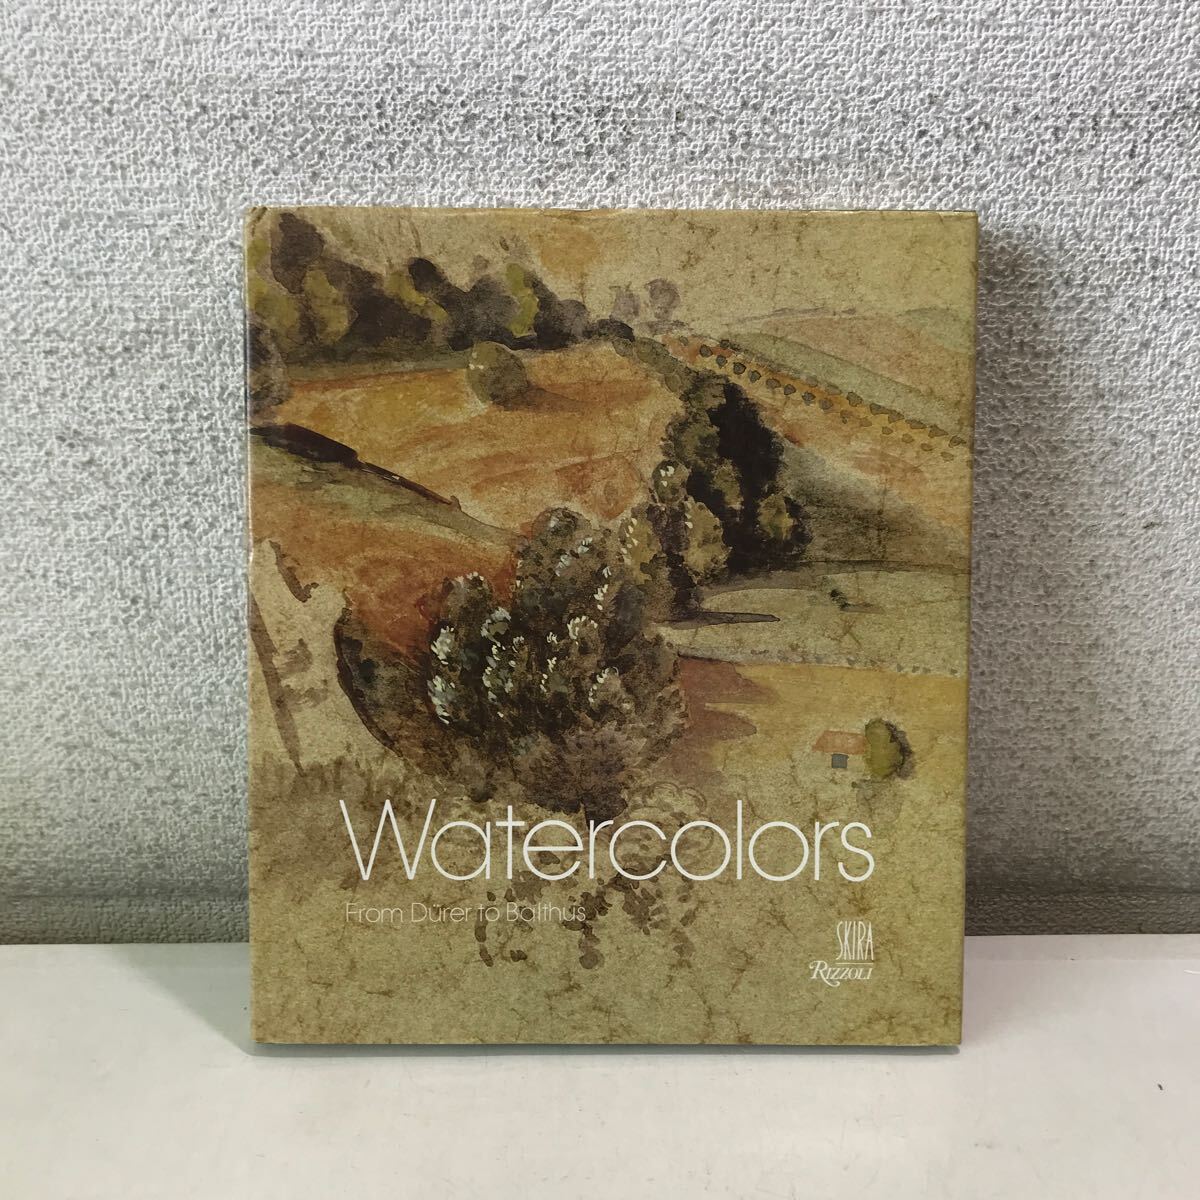 Q08▲ 洋書　図録 Watercolors From Durer to Balthus by Jean Leymarie 1972年発行　 ▲240511 _画像1